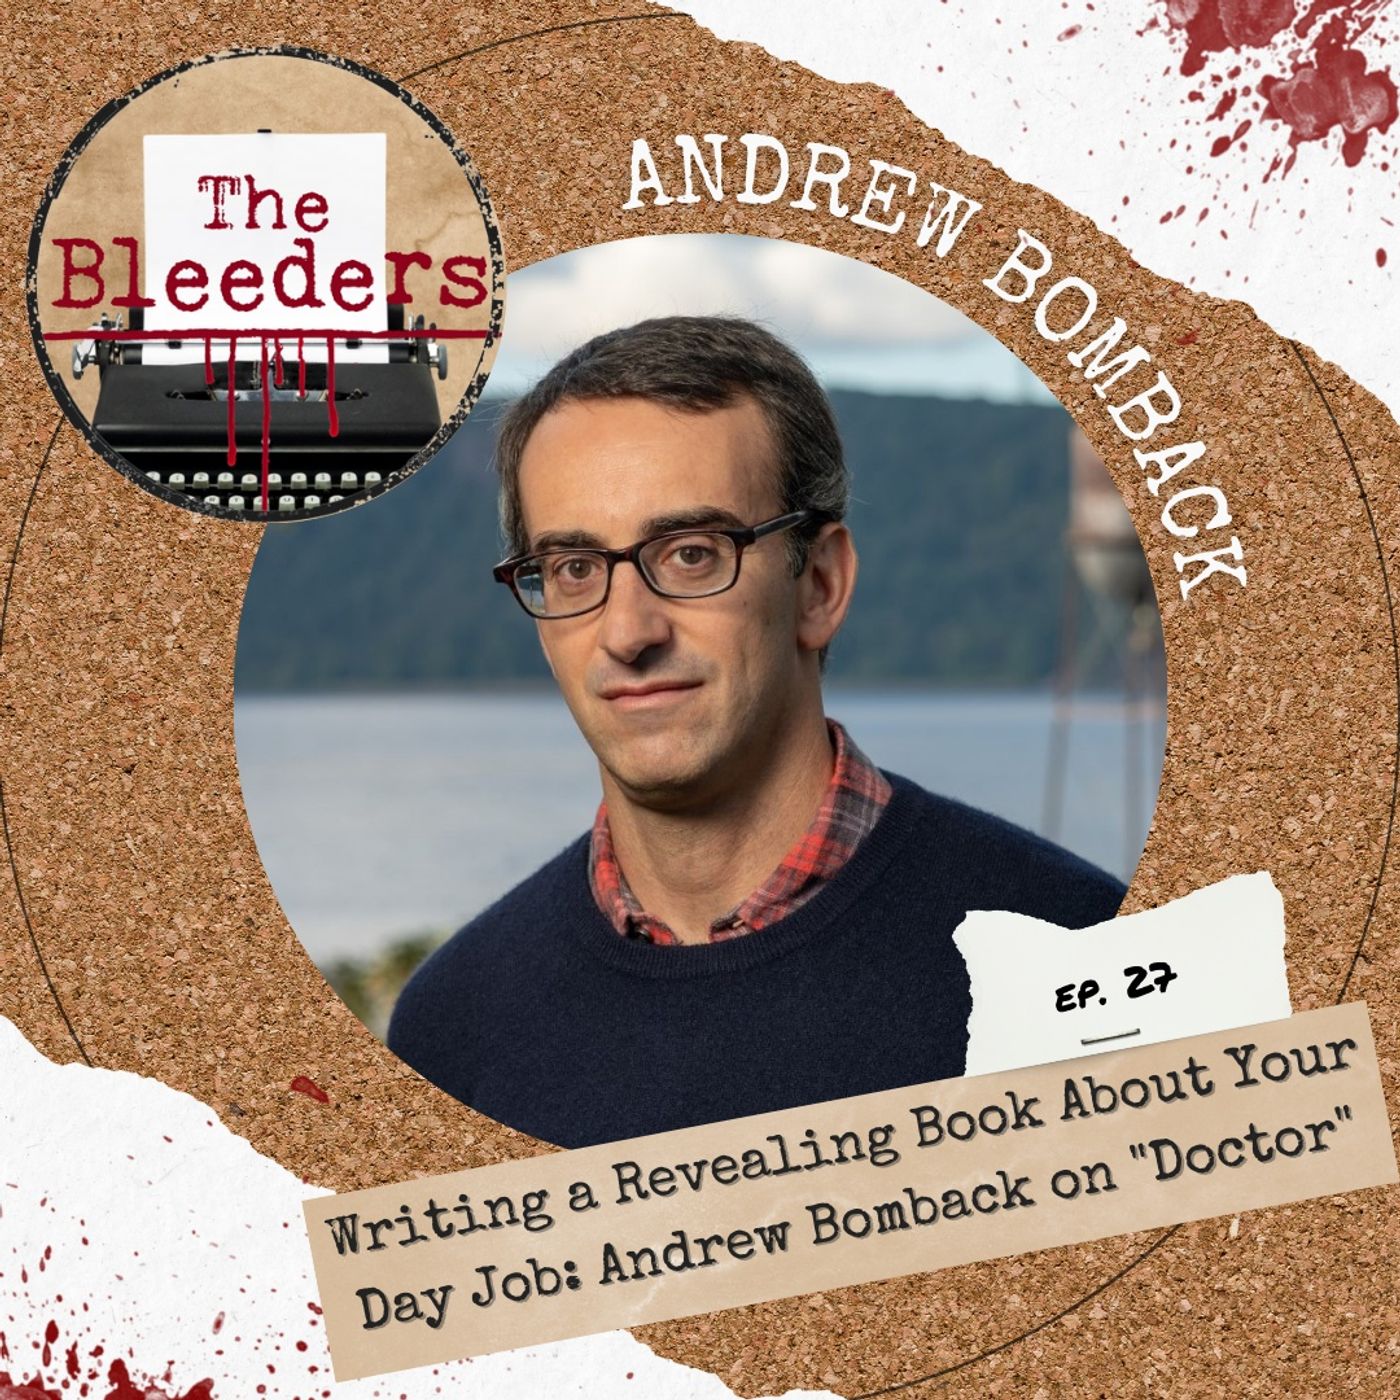 Writing a Revealing Book About Your Day Job: Andrew Bomback on ”Doctor”